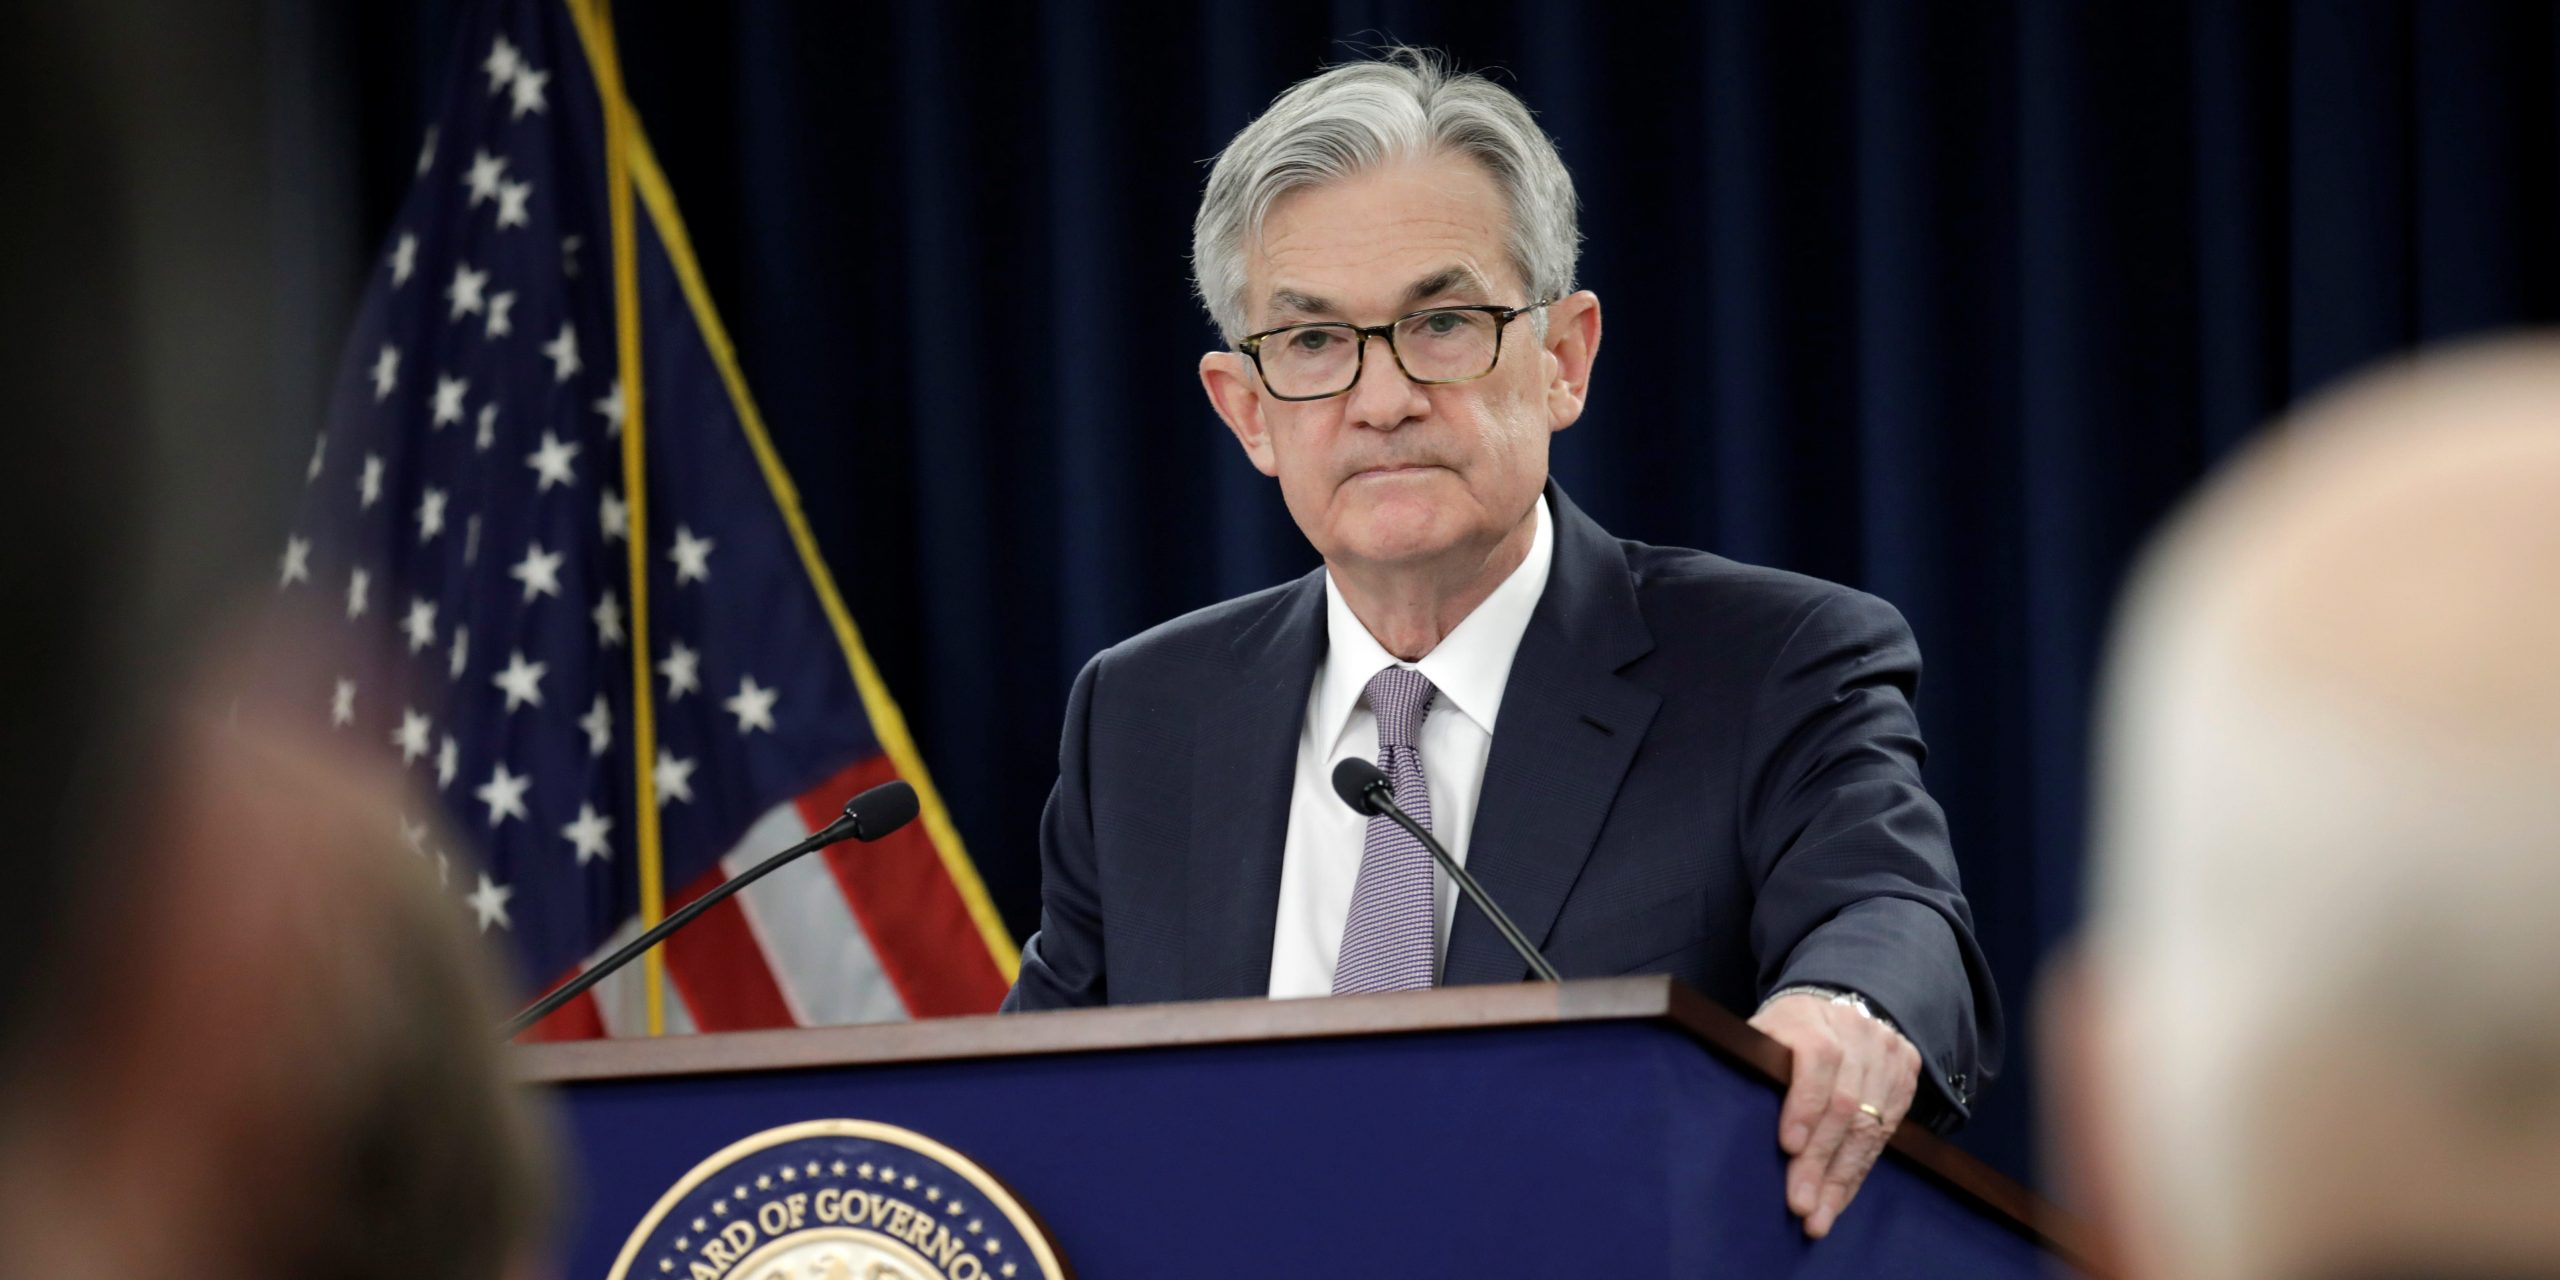 Federal Reserve Chairman Jerome Powell holds a news conference following the two-day meeting of the Federal Open Market Committee (FOMC) meeting on interest rate policy in Washington, U.S., January 29, 2020. REUTERS/Yuri Gripas